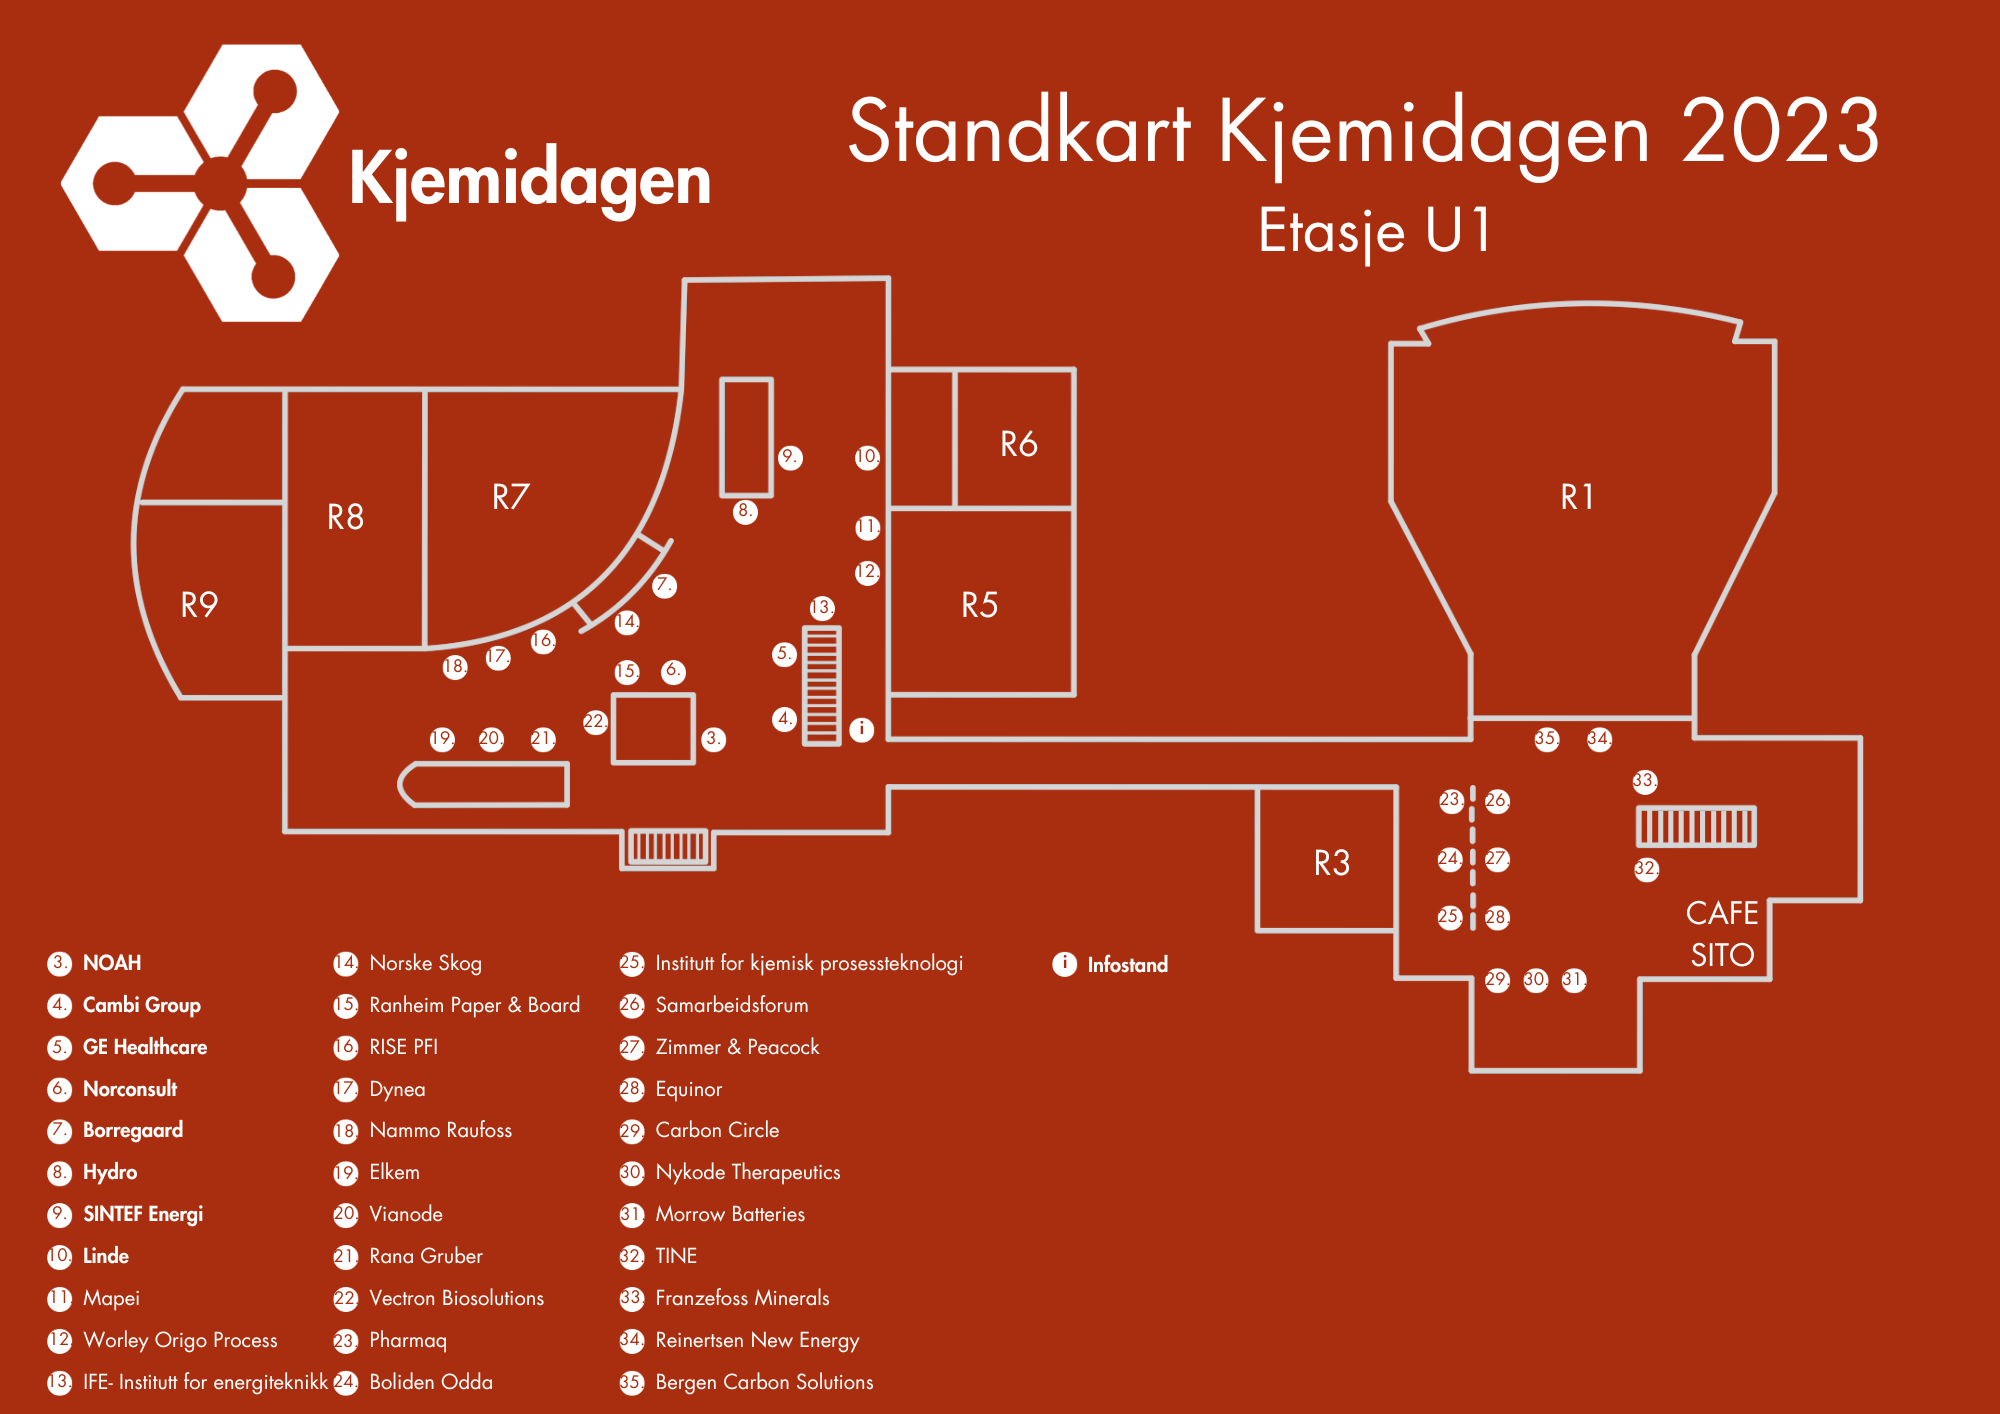 Map of the stands in etg u1